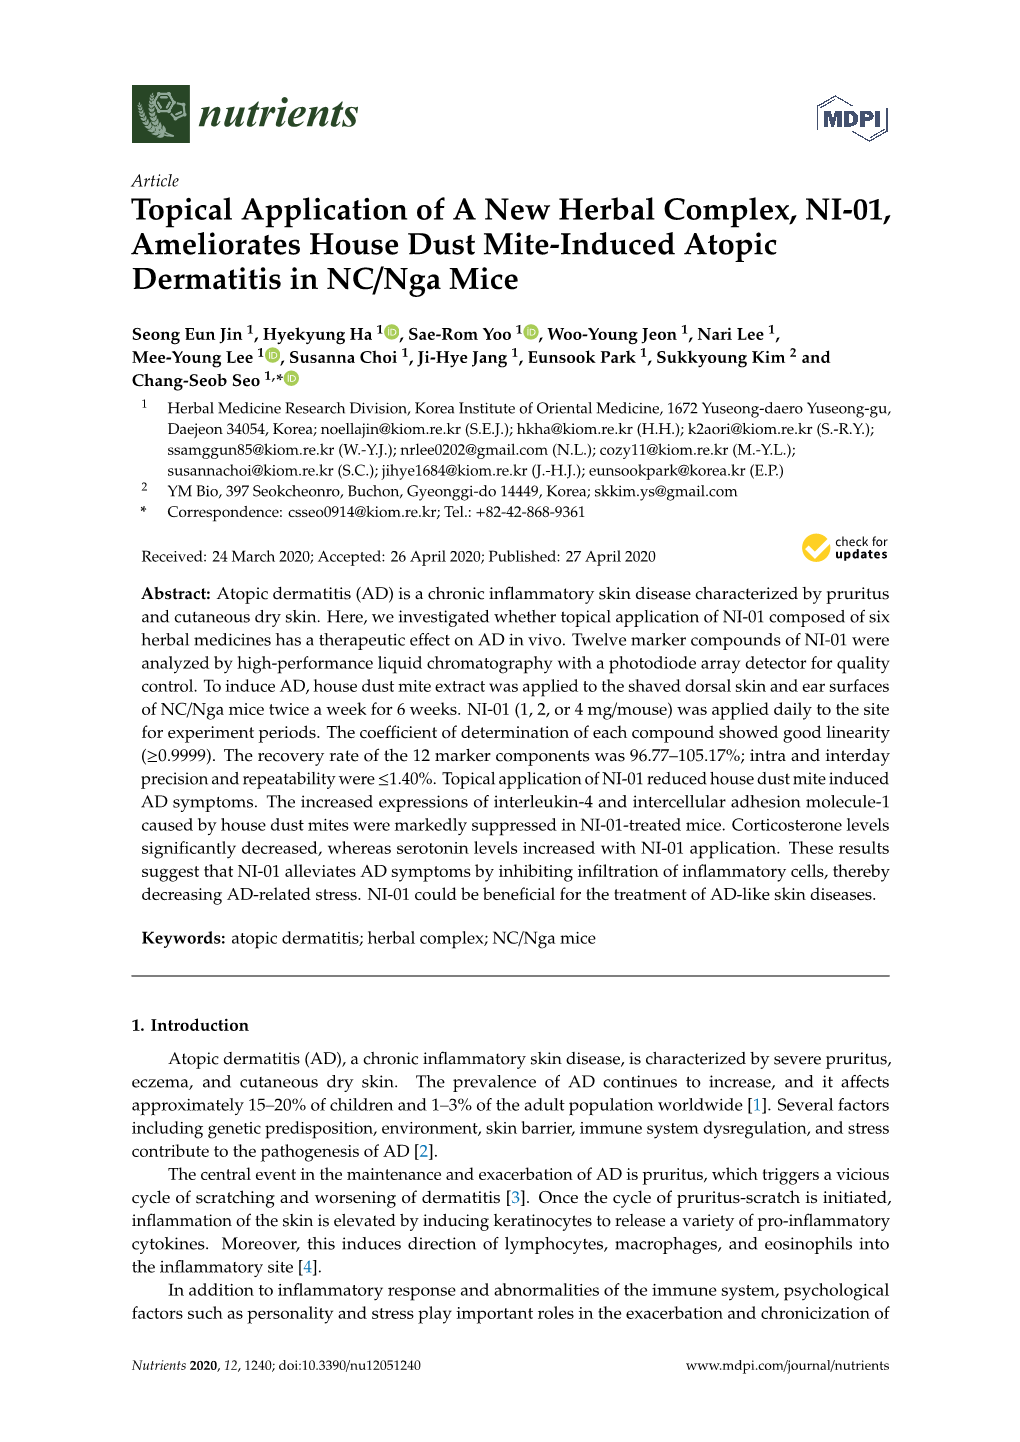 Topical Application of a New Herbal Complex, NI-01, Ameliorates House Dust Mite-Induced Atopic Dermatitis in NC/Nga Mice